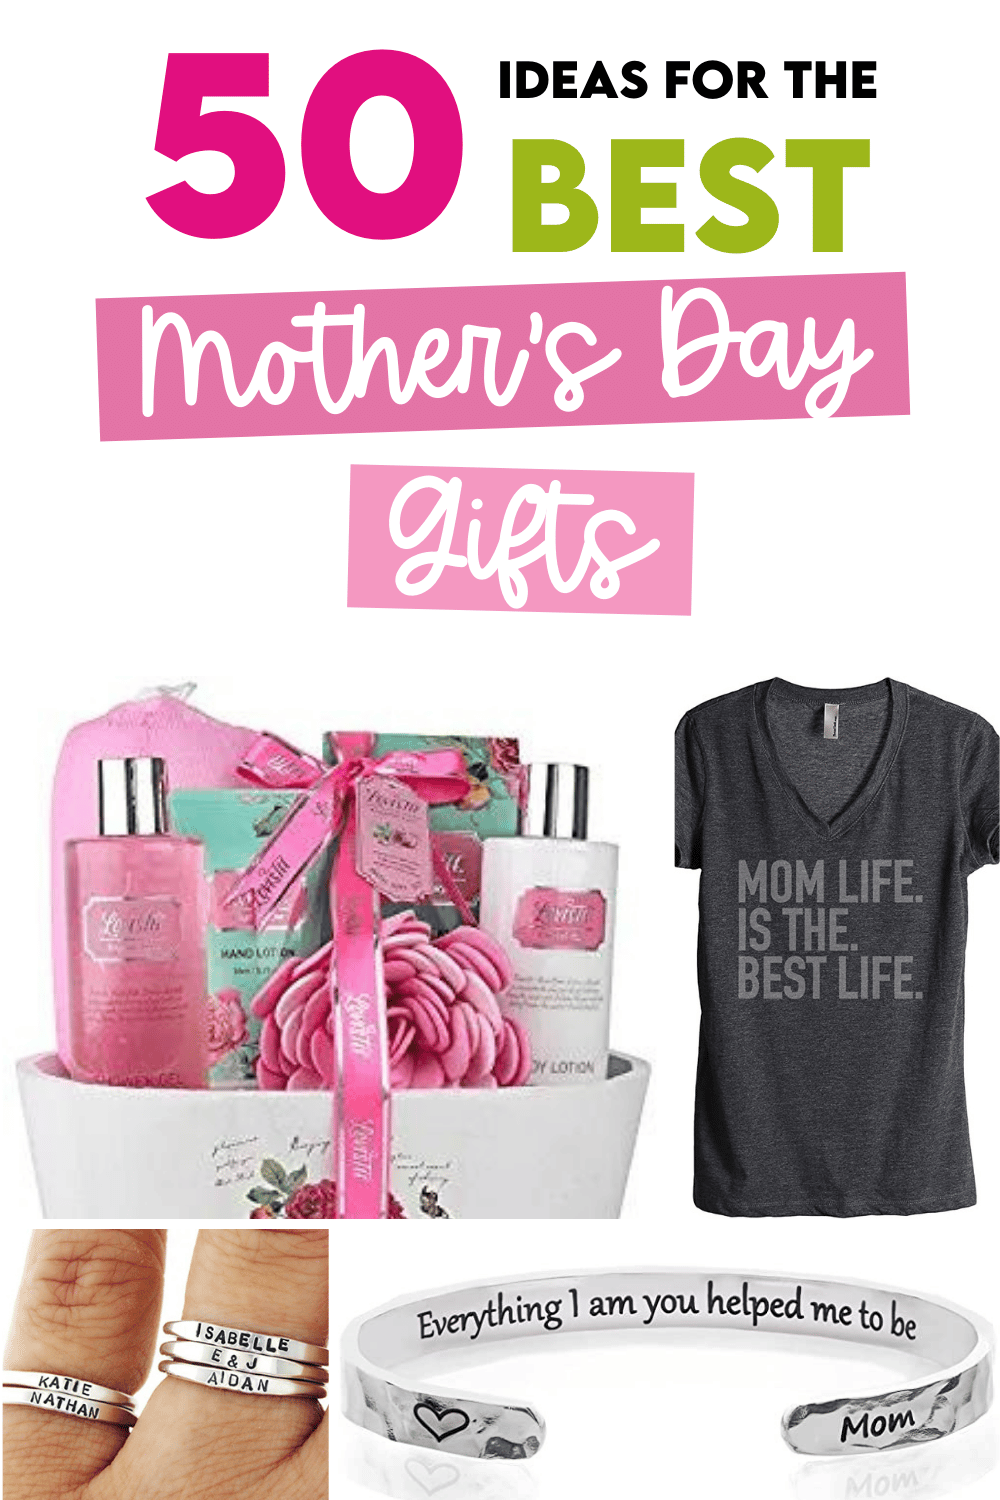 I can't wait to spoil my mom with these Mother's Day gift ideas! I love #18! | The Dating Divas